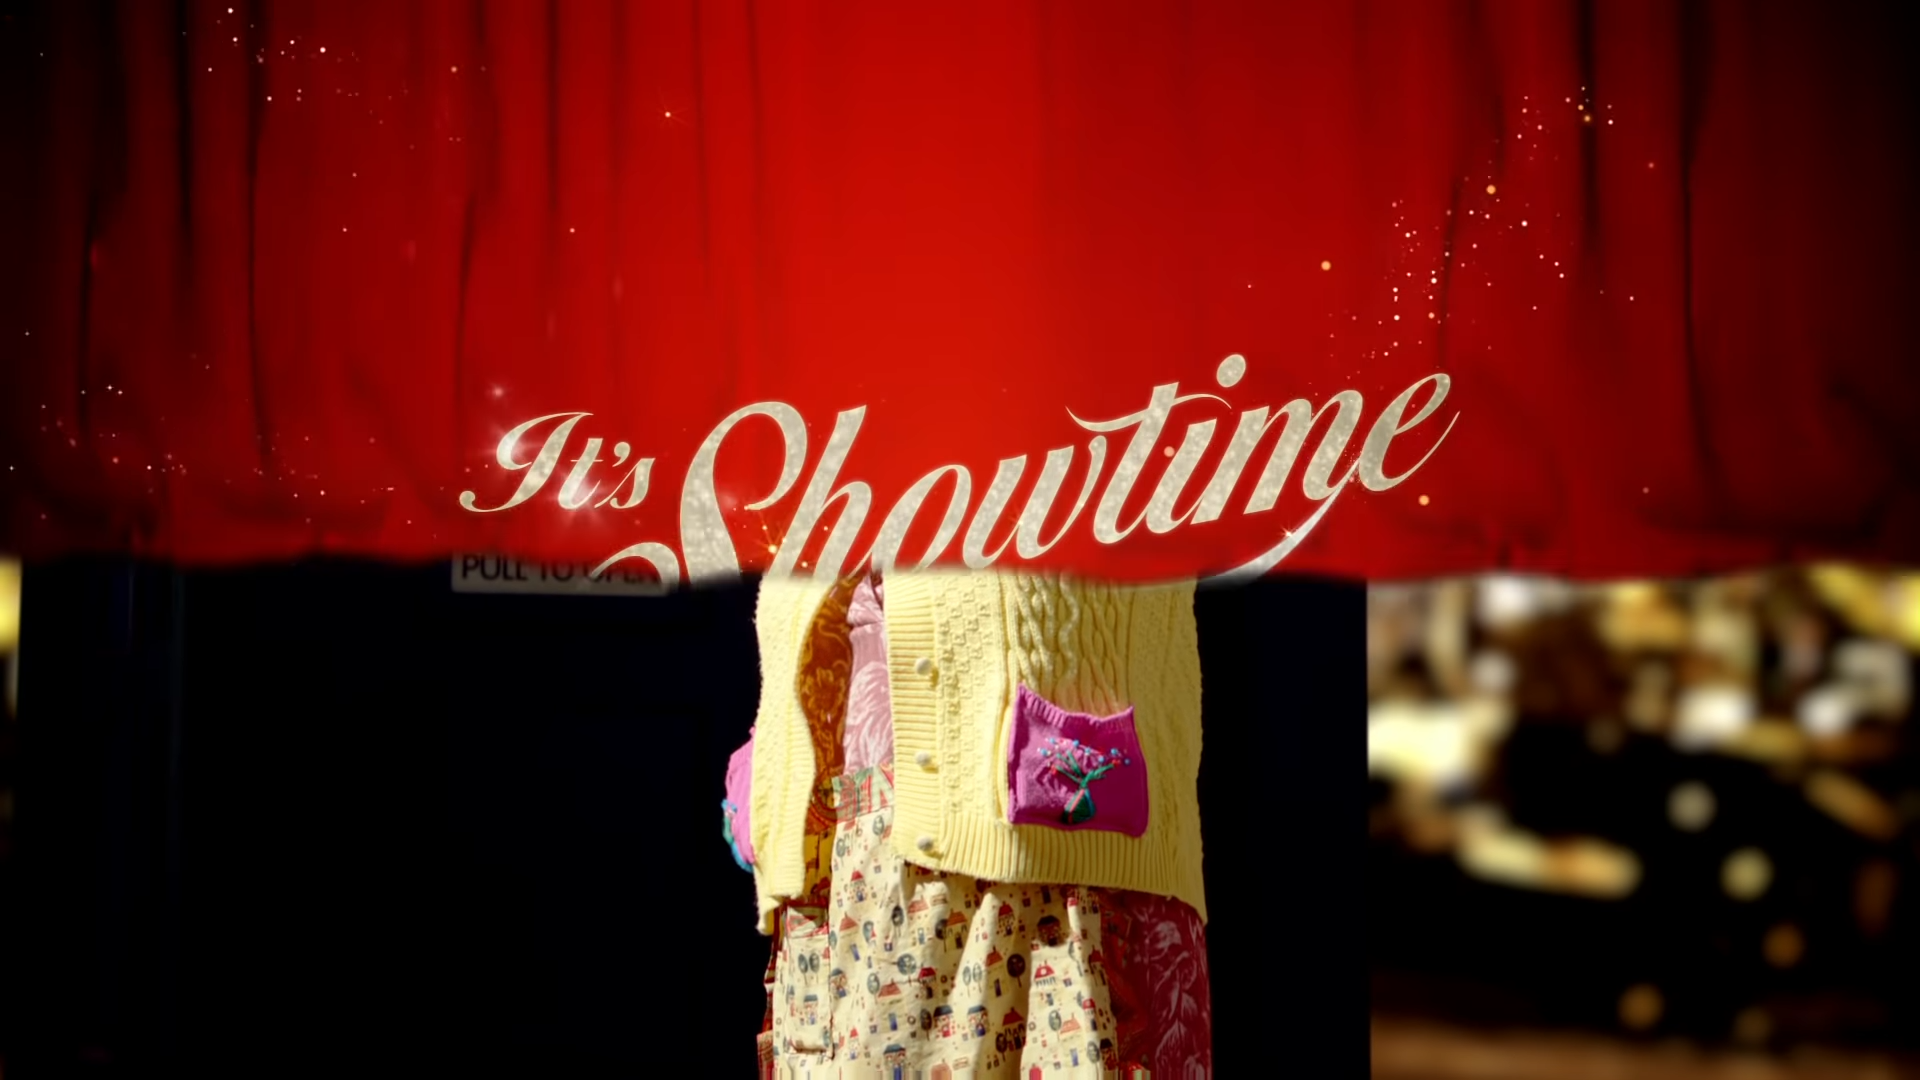 The It's Showtime [+]Loading...["It's Showtime (TV story)"] banner falls in front of Agnes.